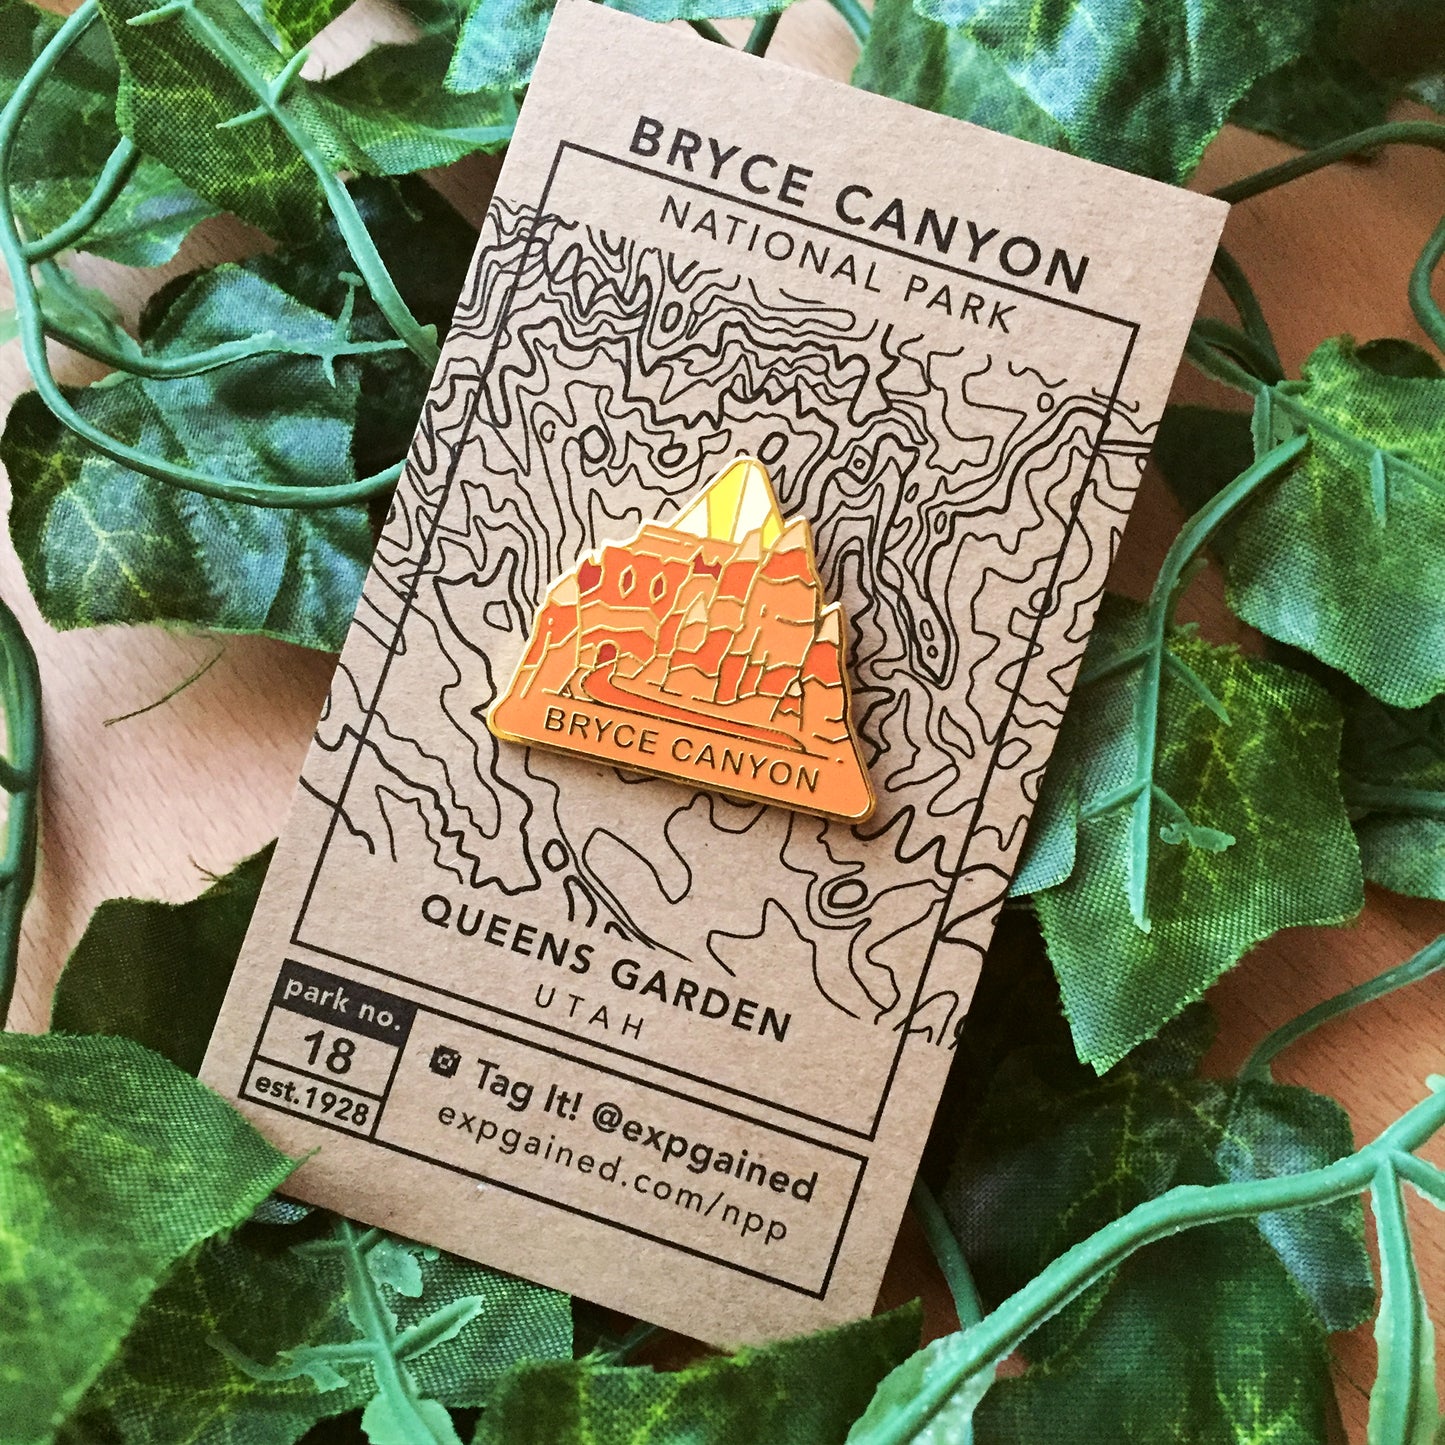 Triangle Bryce Canyon national park enamel pin featuring a view from the beehive hike on a brown business card size backing card with a topo map of the Queens Garden.